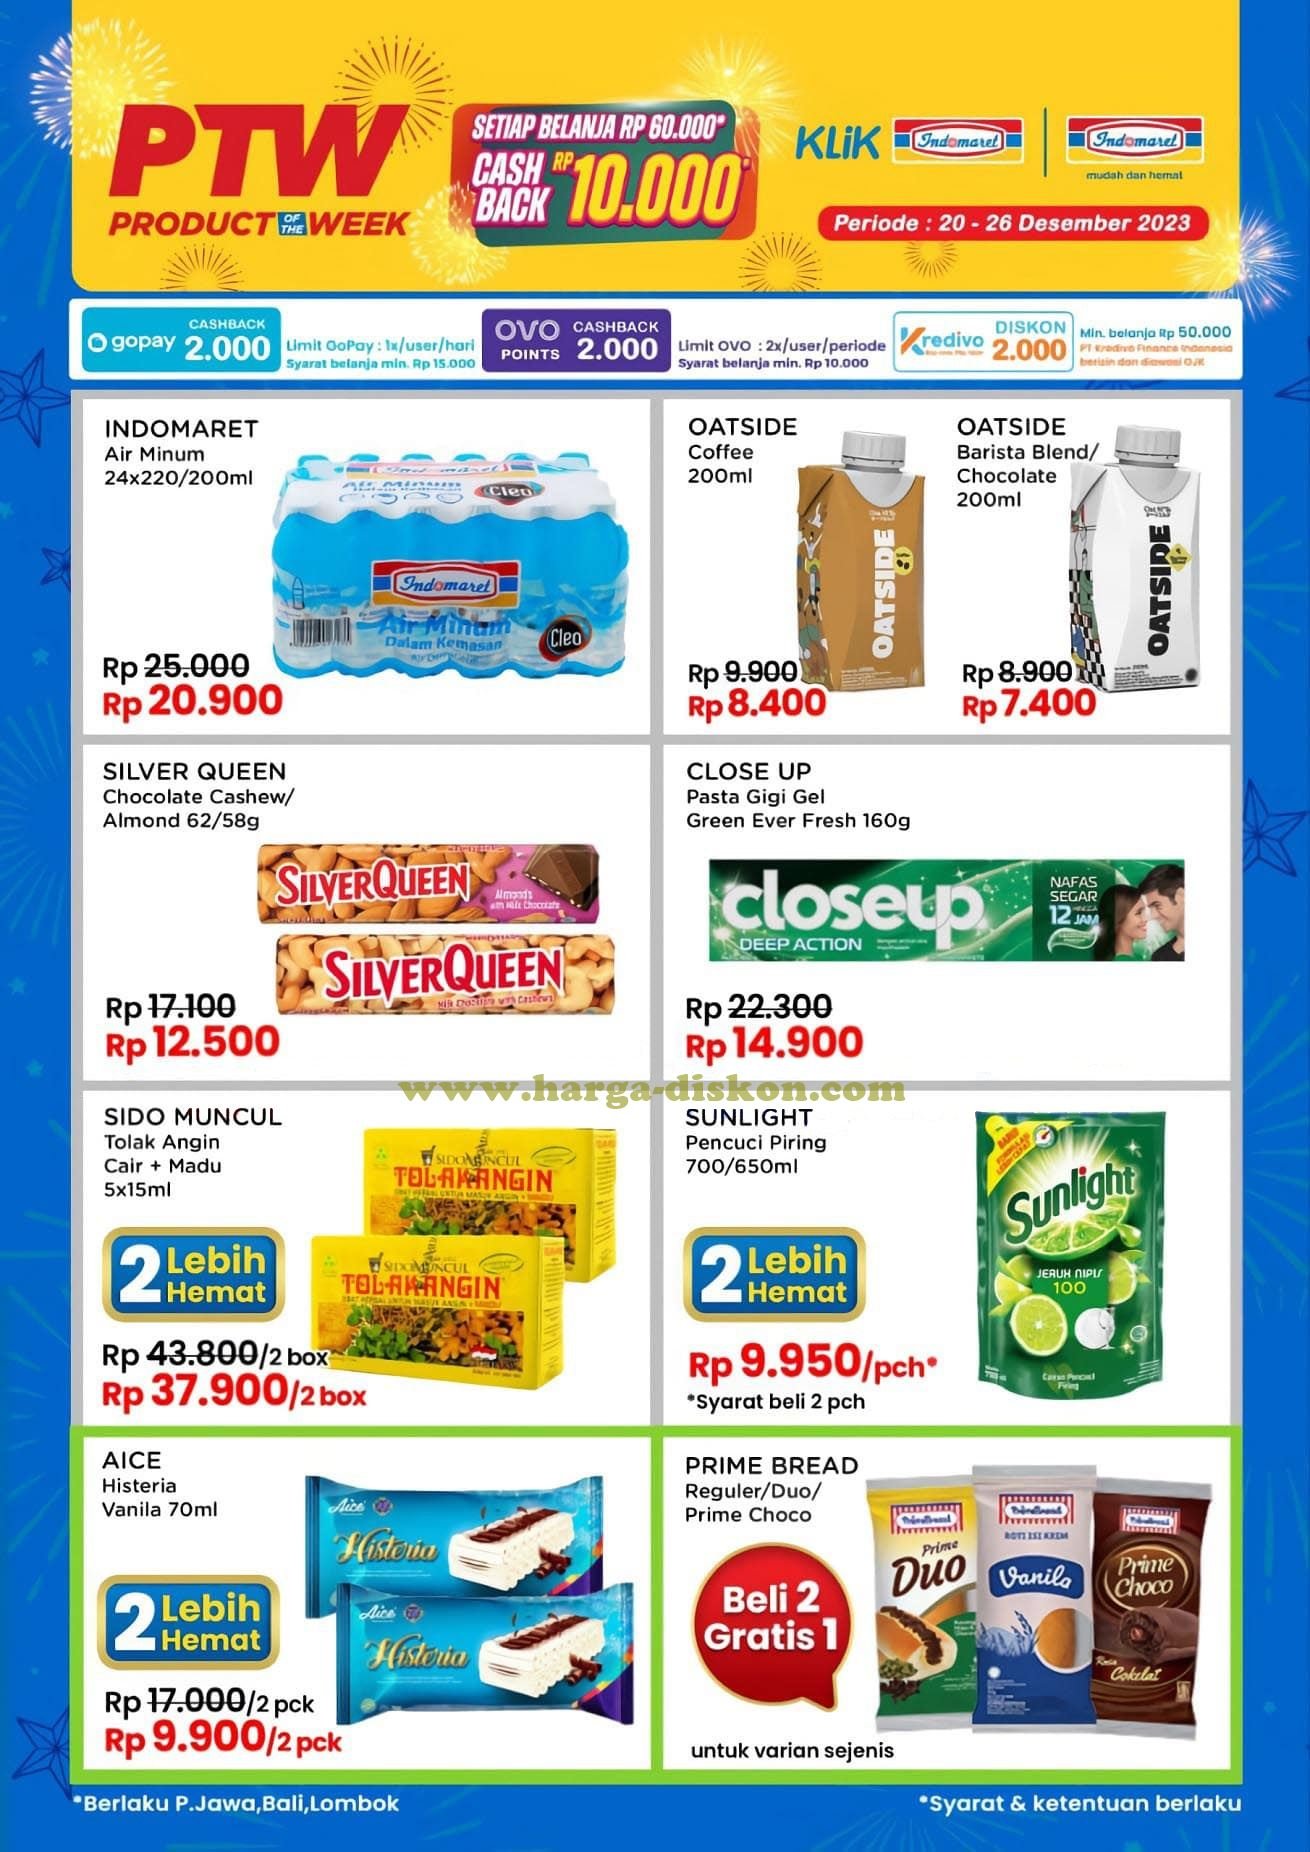 Promo INDOMARET Product of The Week 20 - 26 Desember 2023 promo indomaret, katalog indomaret, diskon indomaret, promo minimarket, promo minyak goreng, Promo INDOMARET, Katalog Terbaru, Diskon minimarket, Promo mingguan, Product of The Week, Periode promo, INDOMARET, Promo Desember 2023, promo terbaru